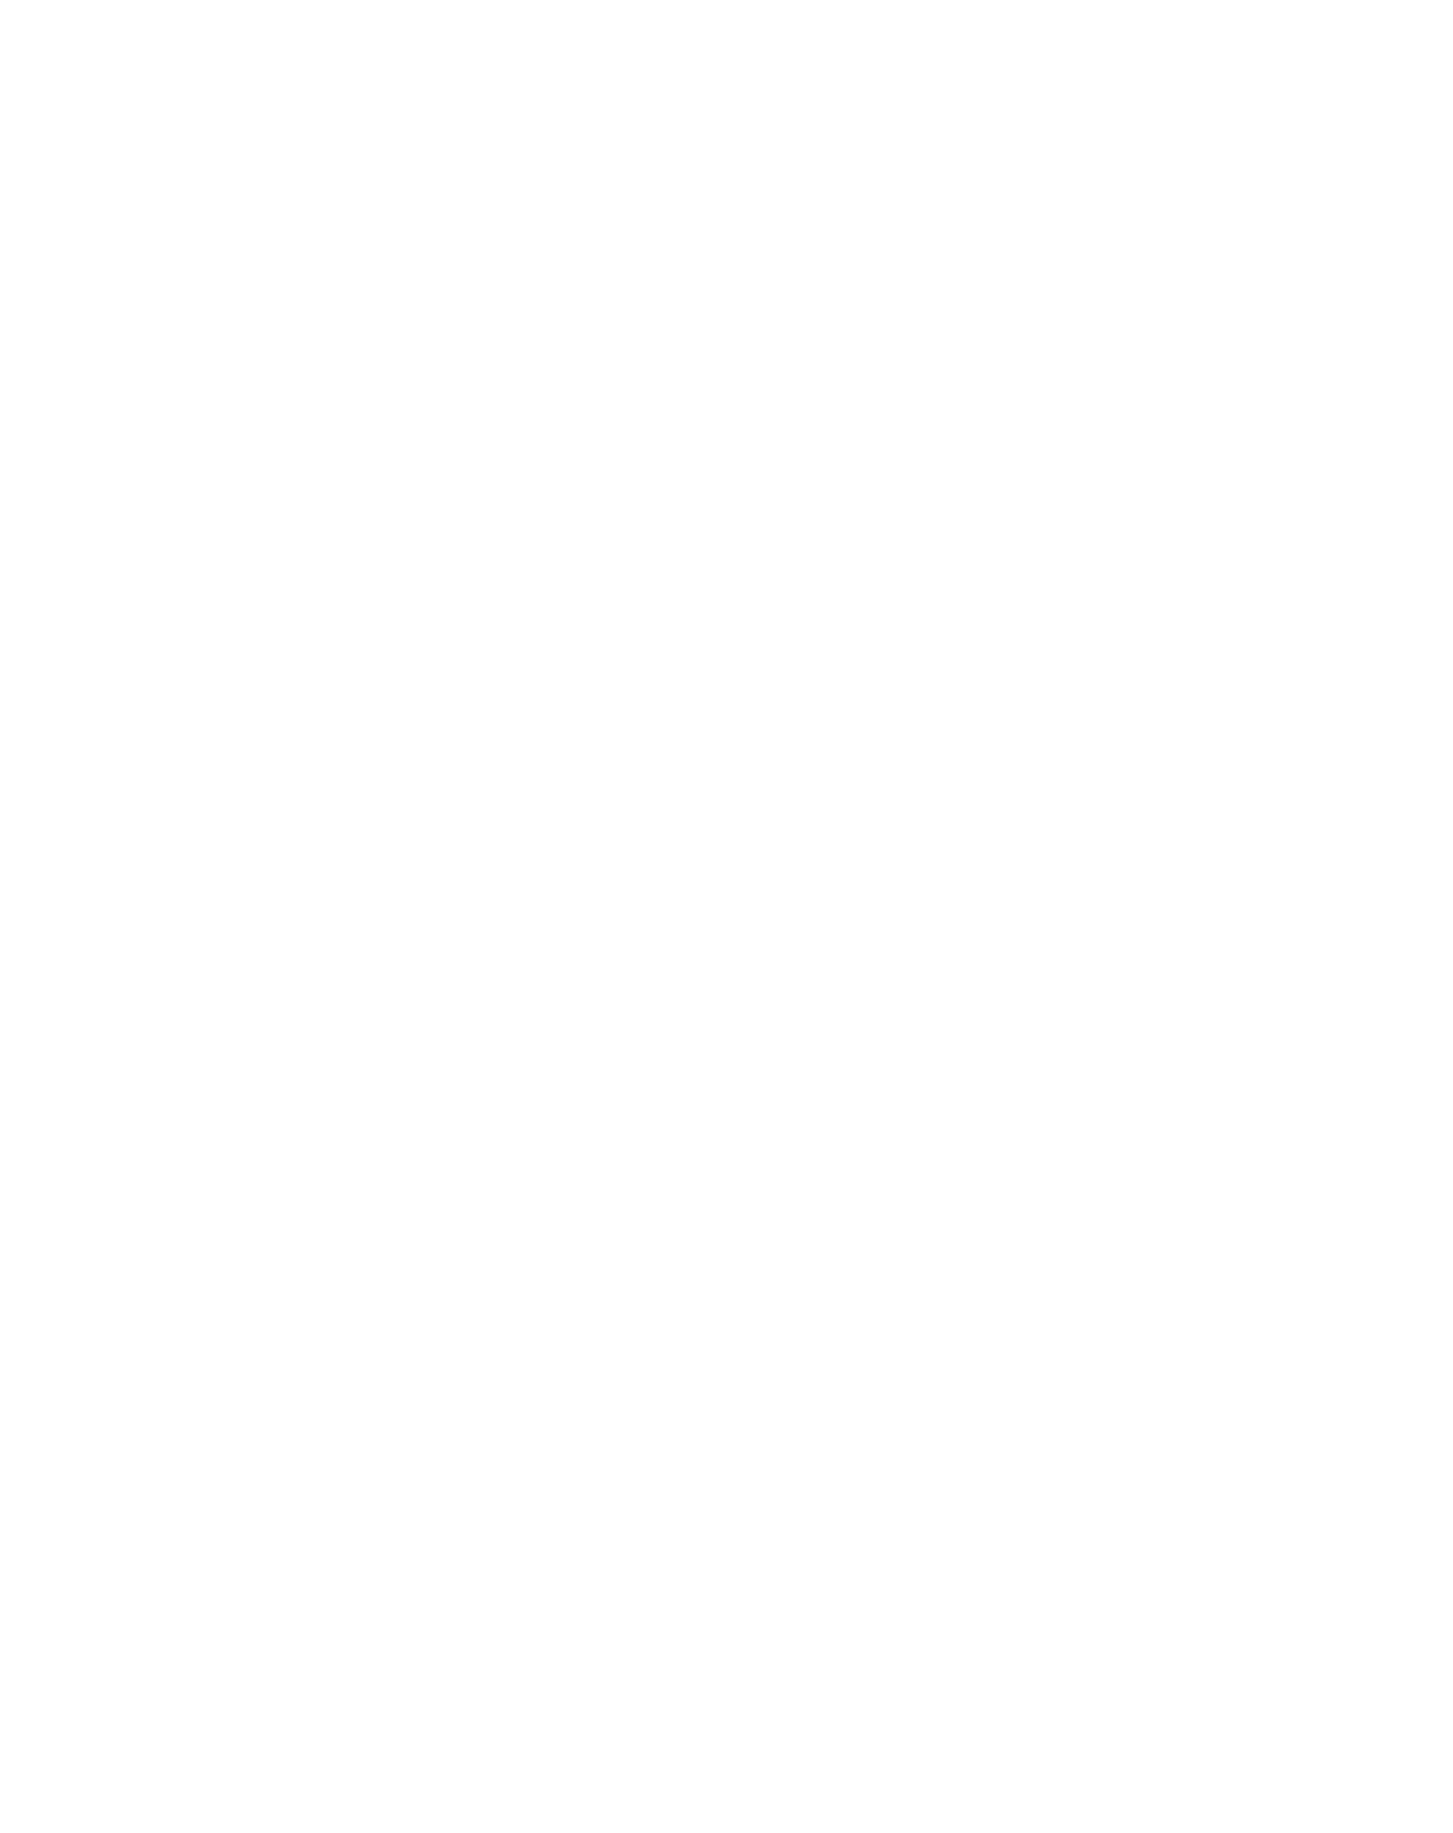 Kitsap Drainage and Waterproofing - local drainage and waterproofing experts specializing in french drains, downspout drains, basement waterproofing, foundation waterproofing and drain cleaning and hydro jetting